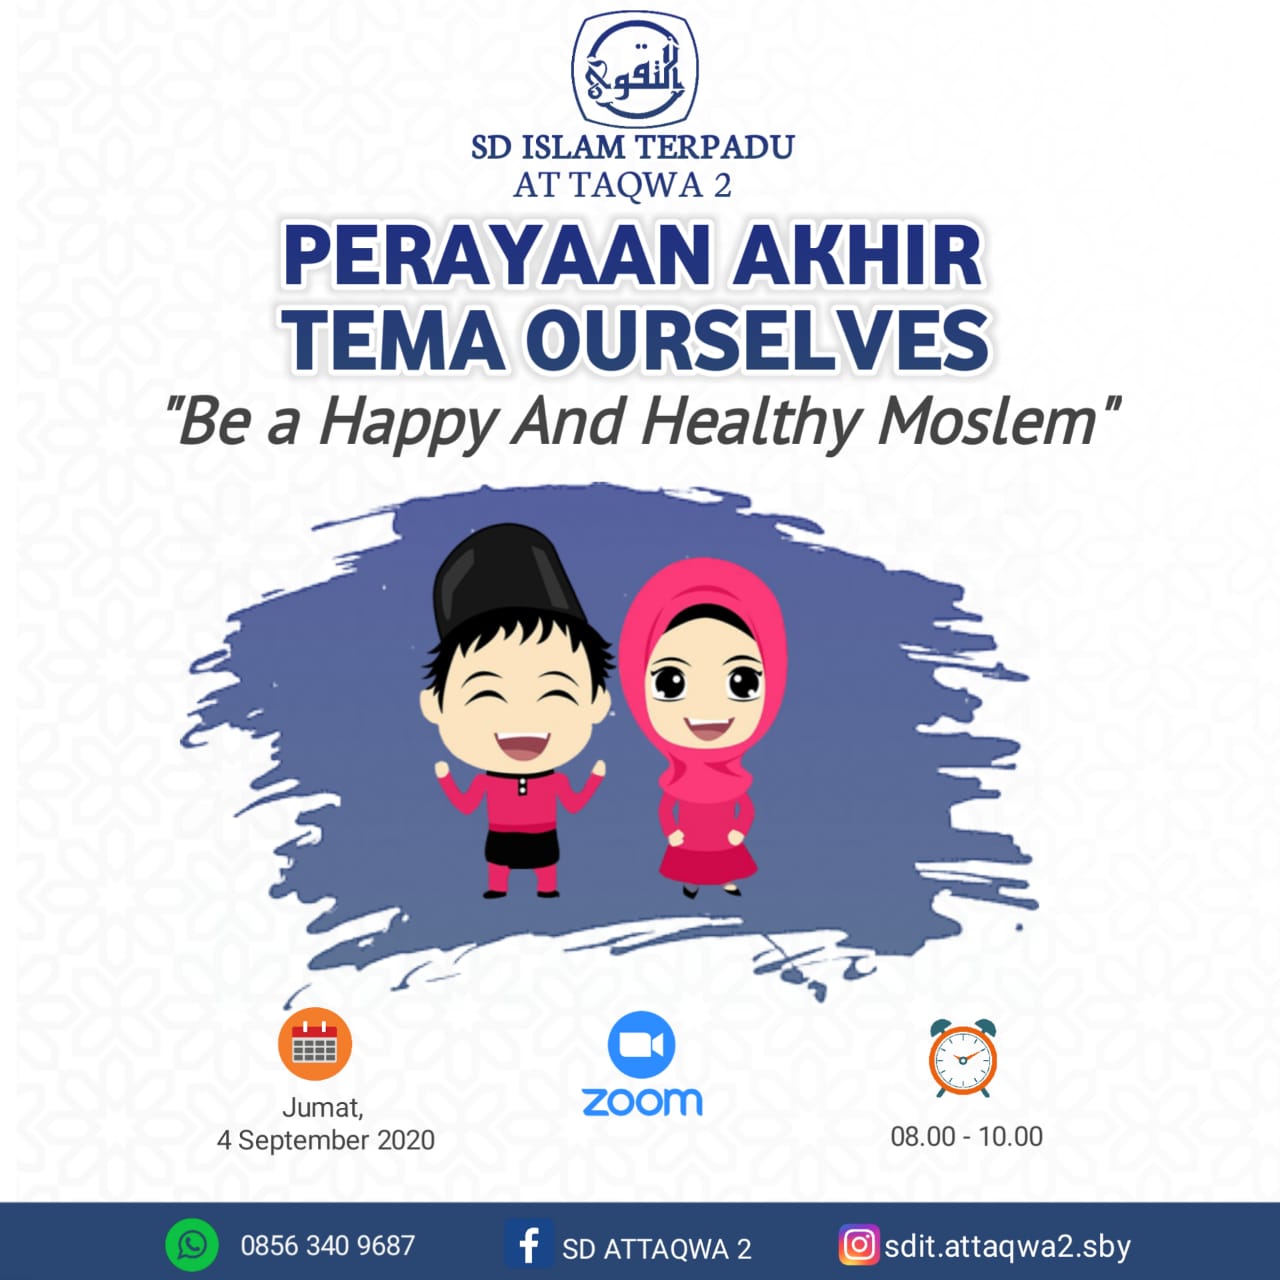 Be a Happy and Healthy Moslem